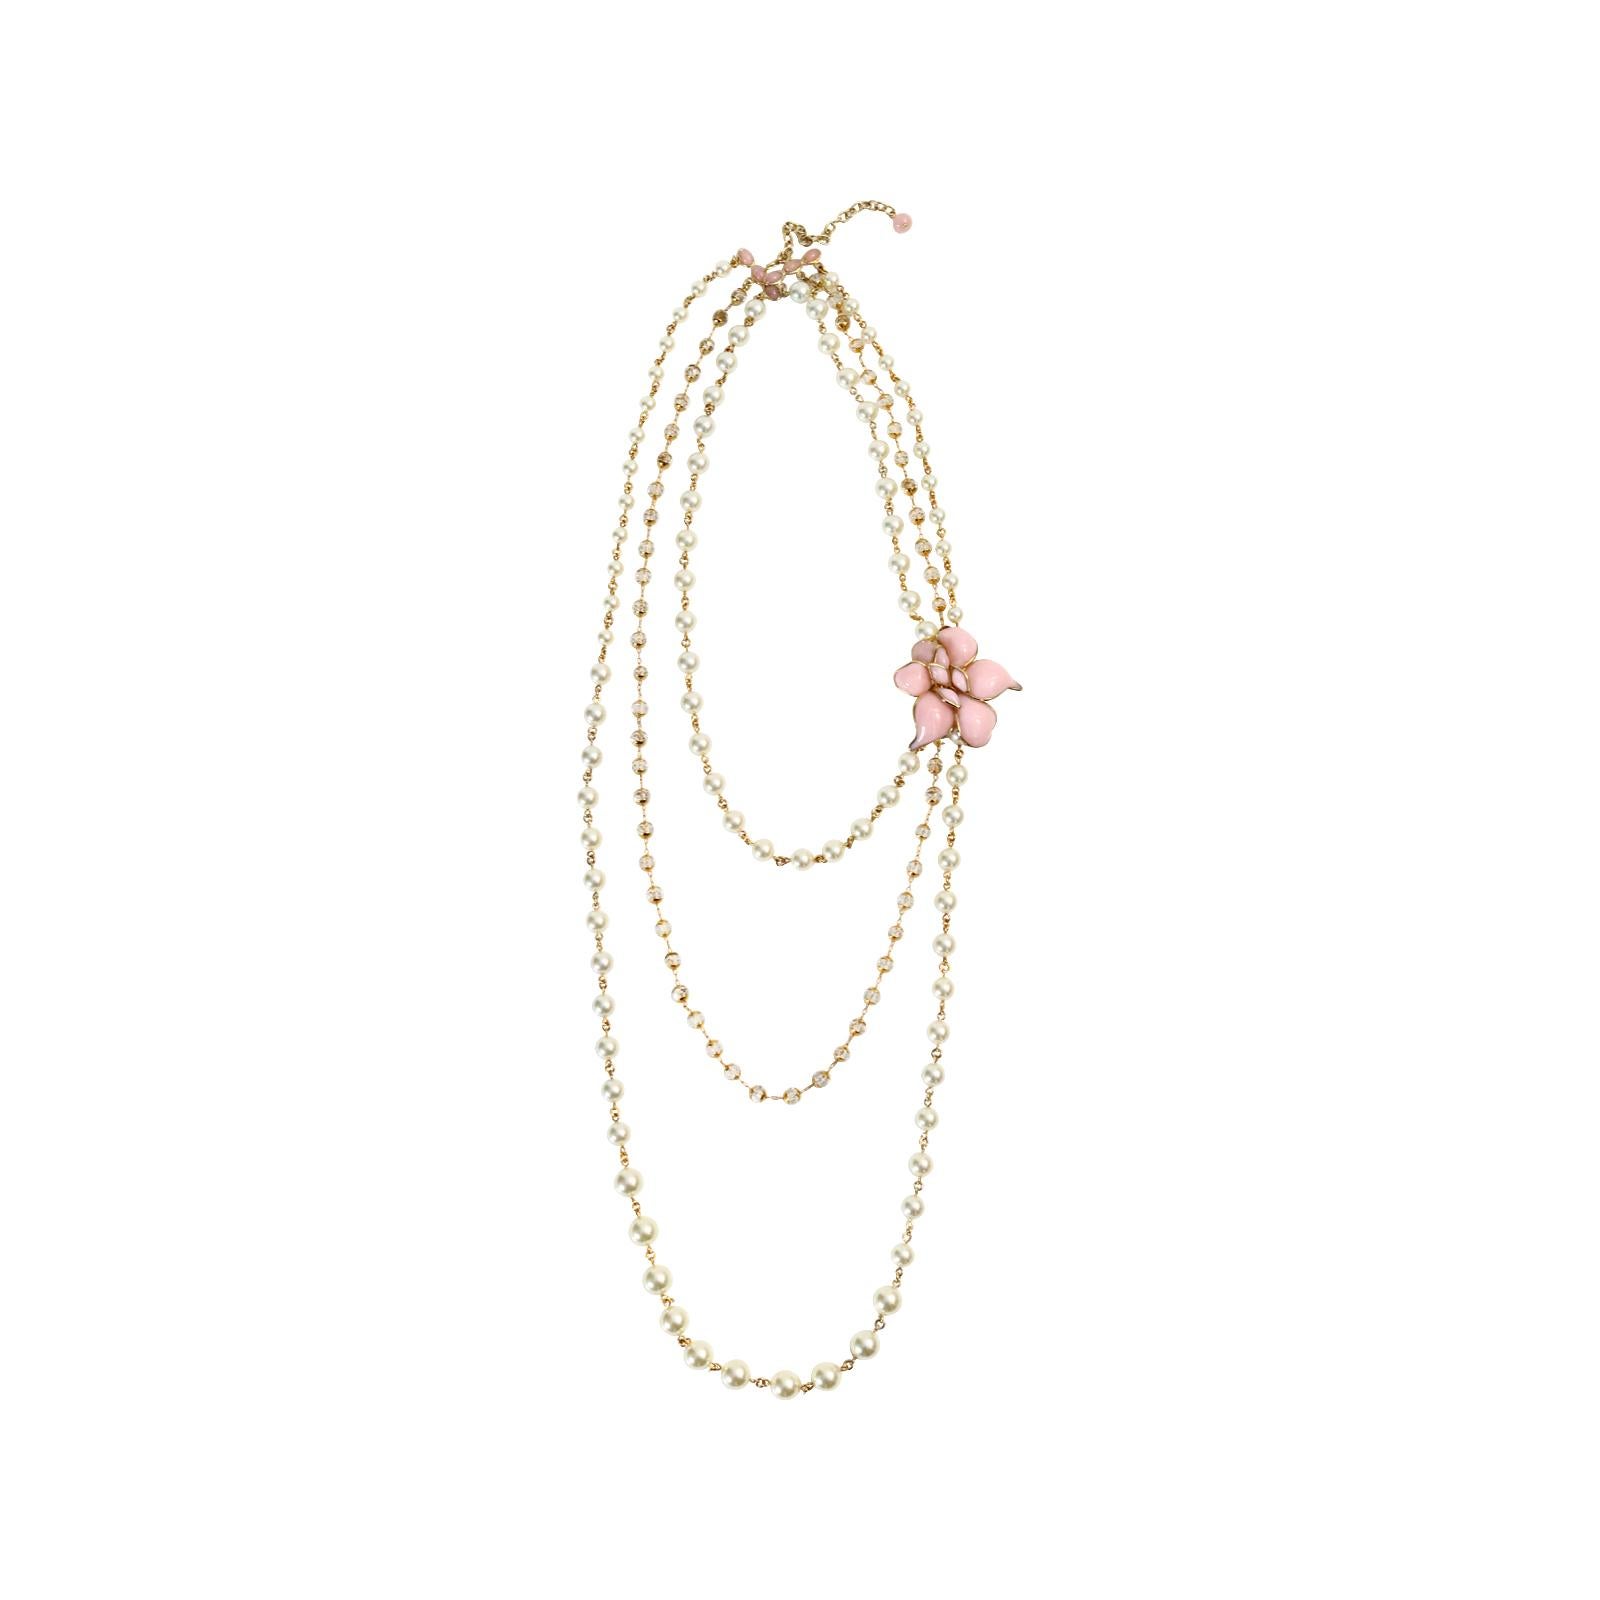 Collectible Augustine Gripoix Gold Tone Pink Pate De Verre Necklace, Circa 2000s In Excellent Condition For Sale In New York, NY